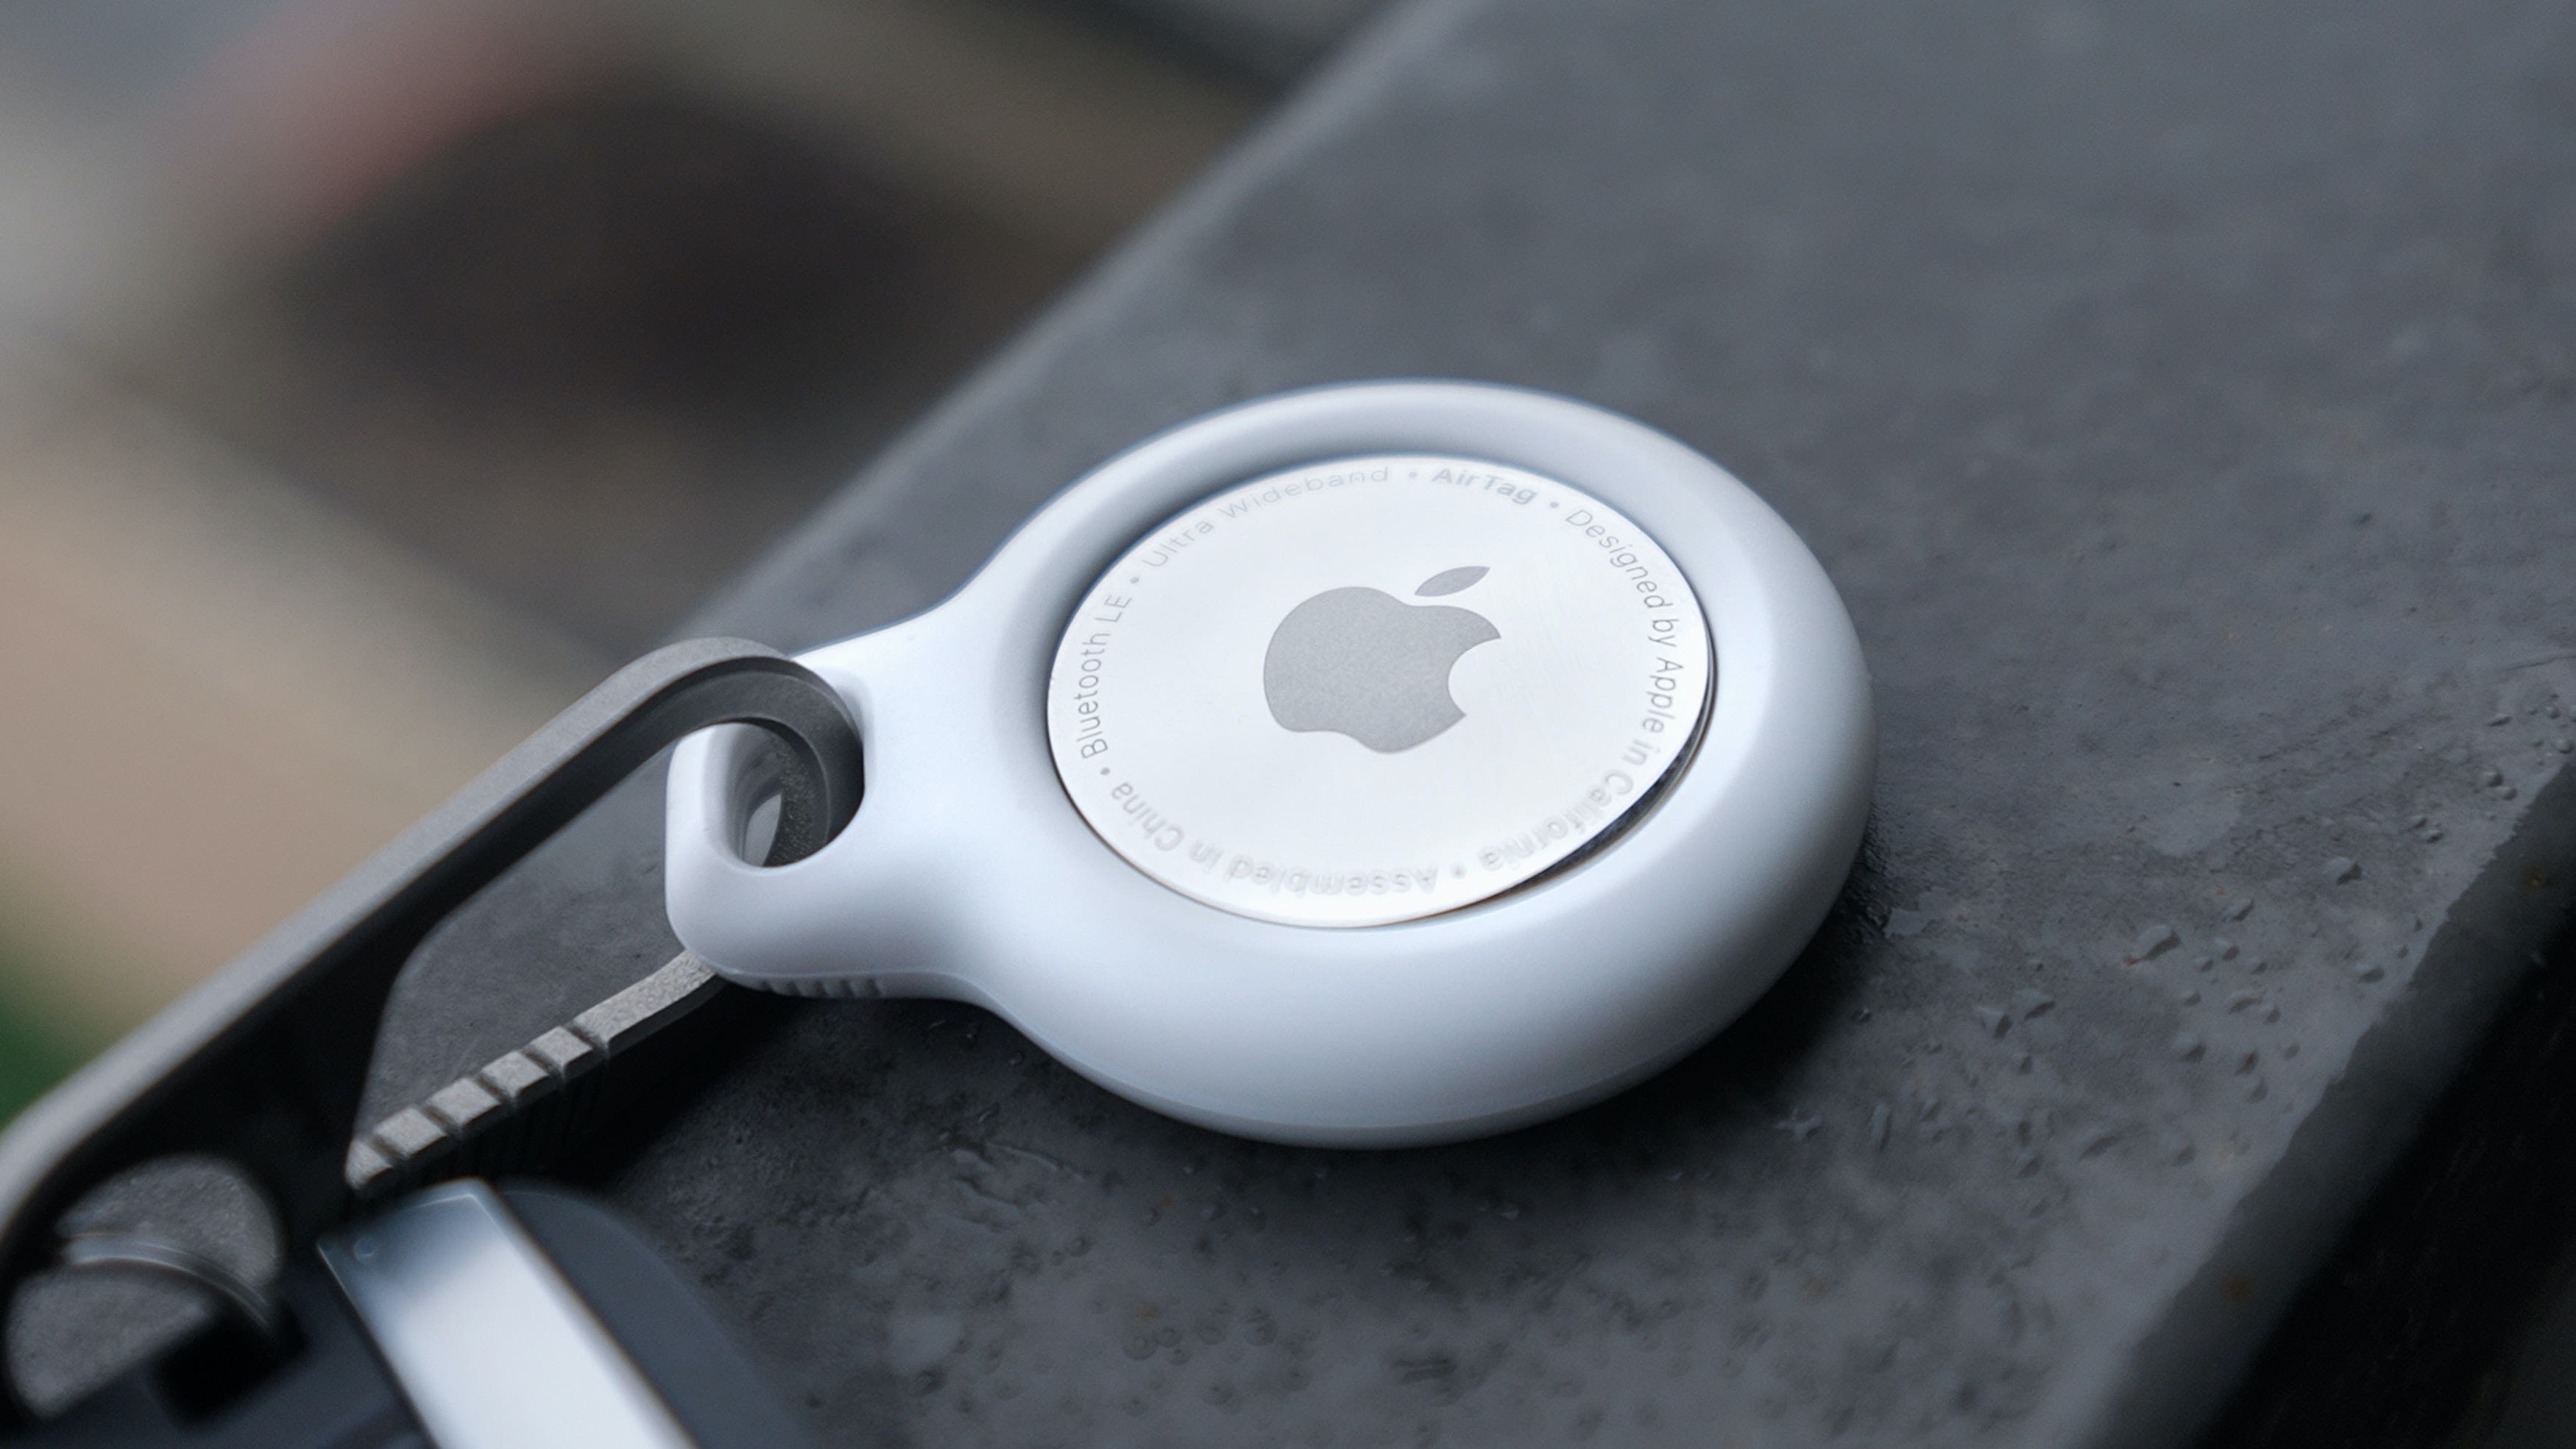 Apple AirTags Are Apparently Giving Users False Alarm About Being Tracked